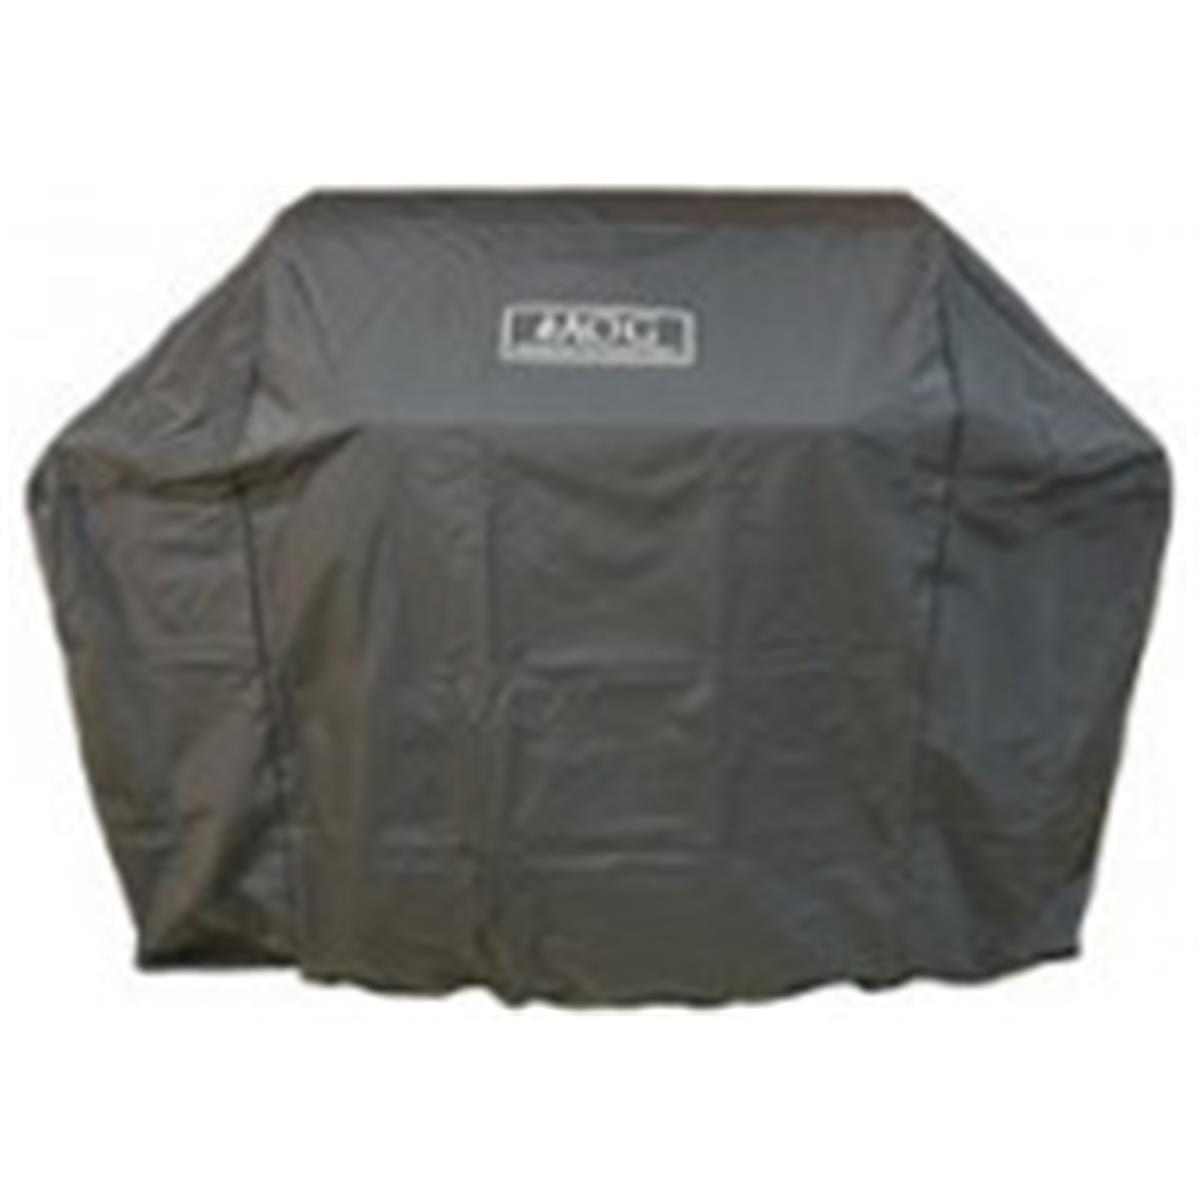 Cc24-d 24 In. Vinyl Portable Grill Cover